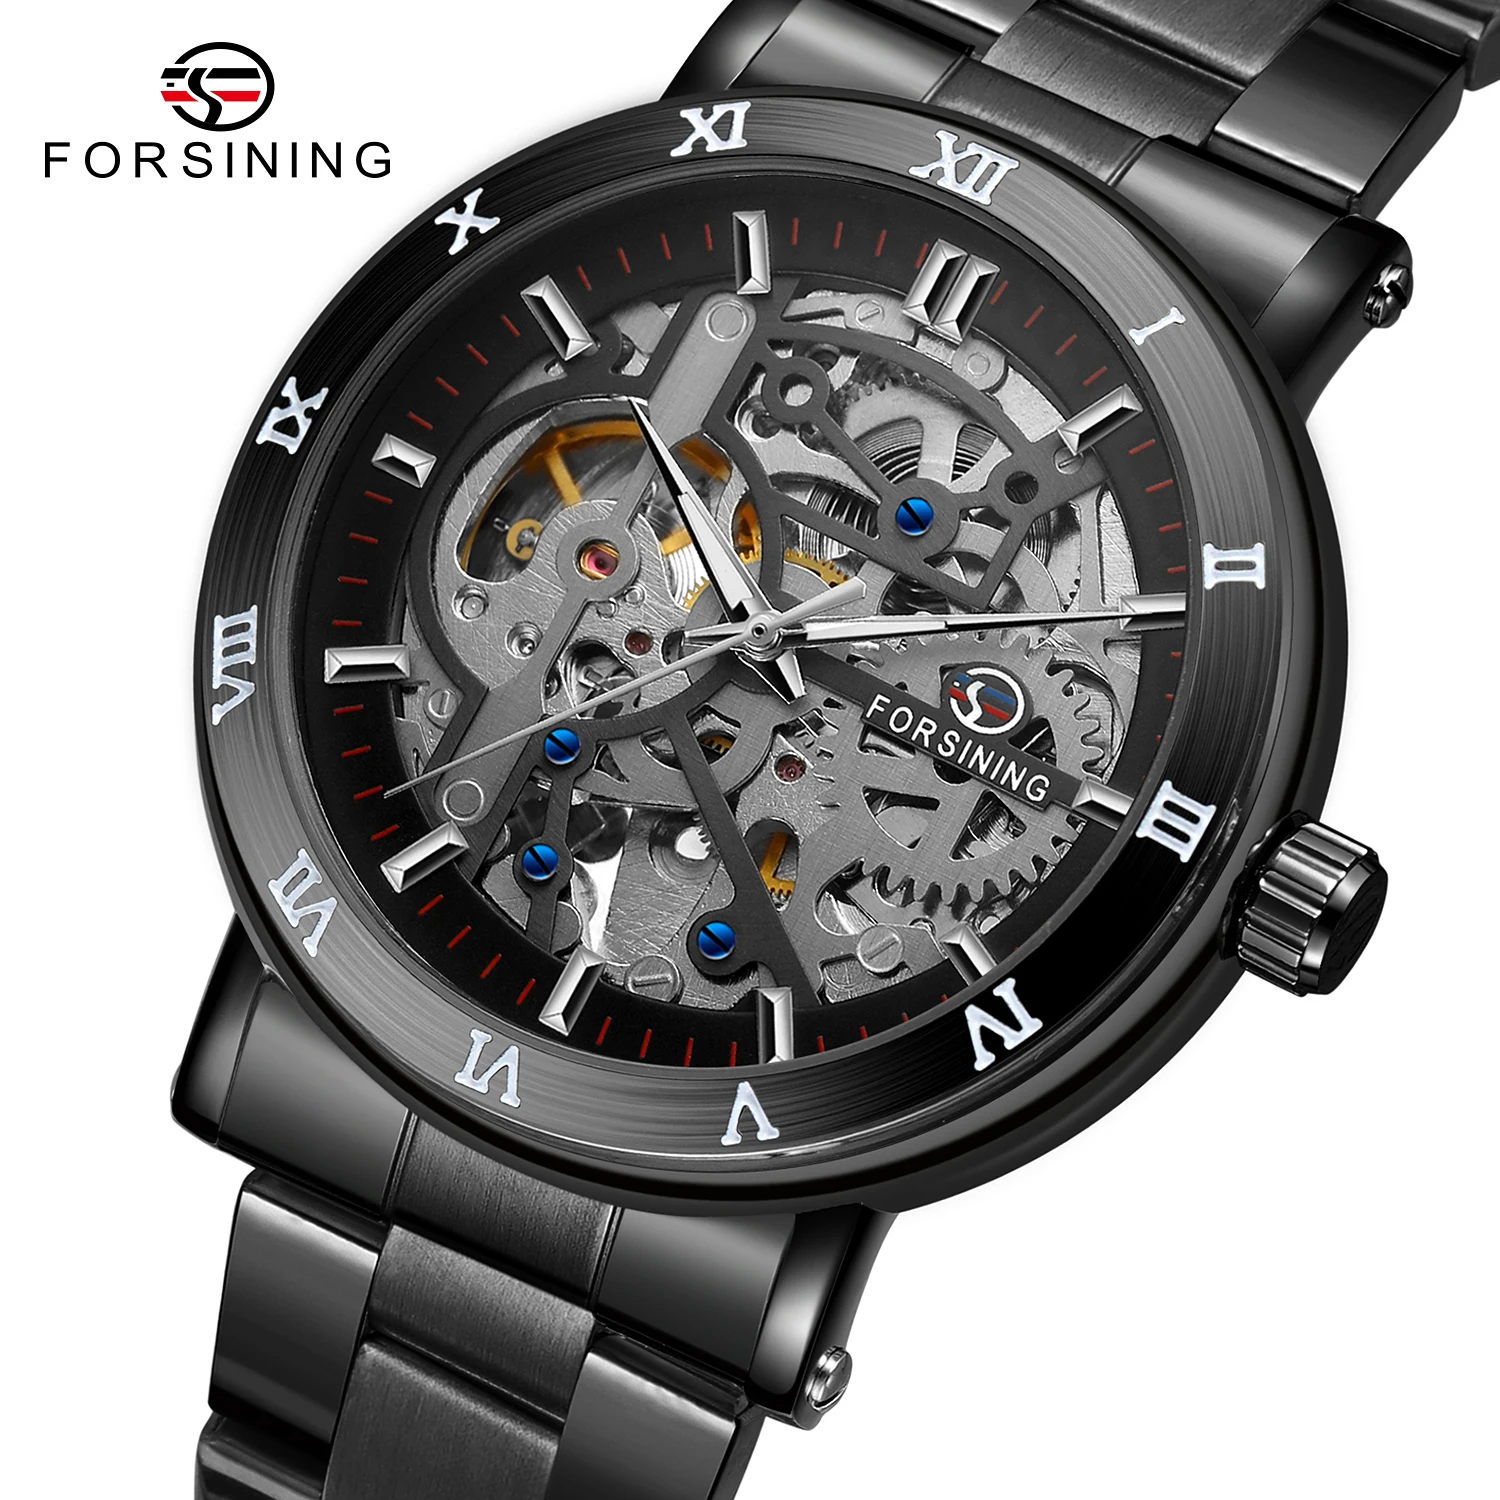 

Luxury Brand Relojes Montre Mens Skeleton Automatic Mechanical Watch Roman Number Dial Wrist Watch Black Stainless Steel Band